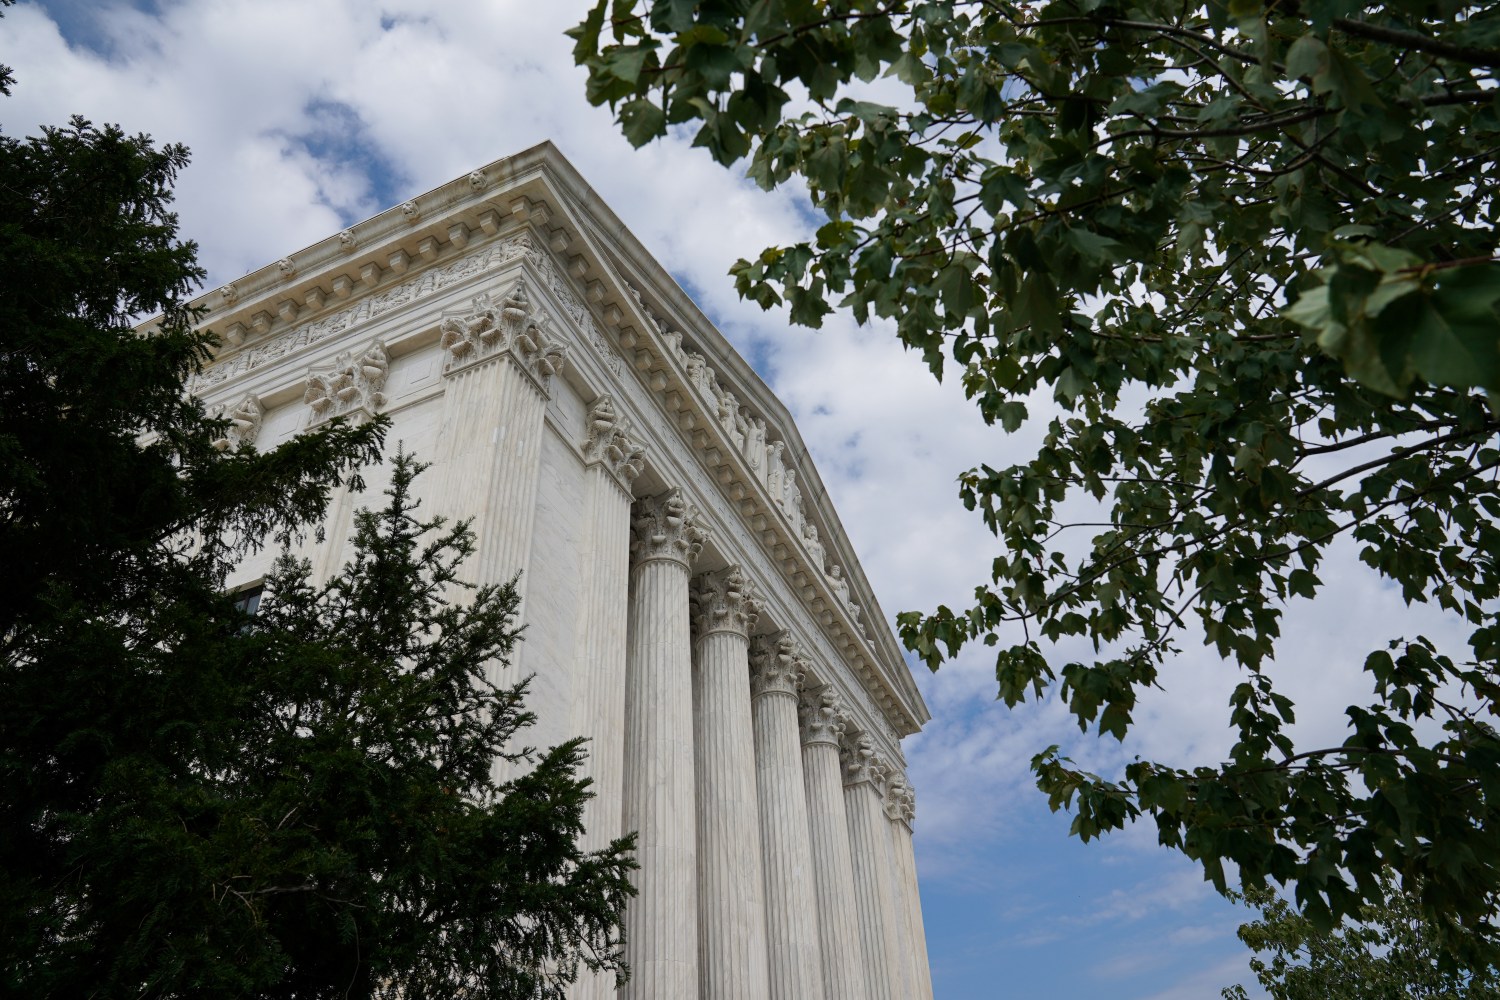 The exterior of the U.S. Supreme Court in Washington, U.S., is seen on September 16, 2019. REUTERS/Sarah Silbiger - RC14827AF520